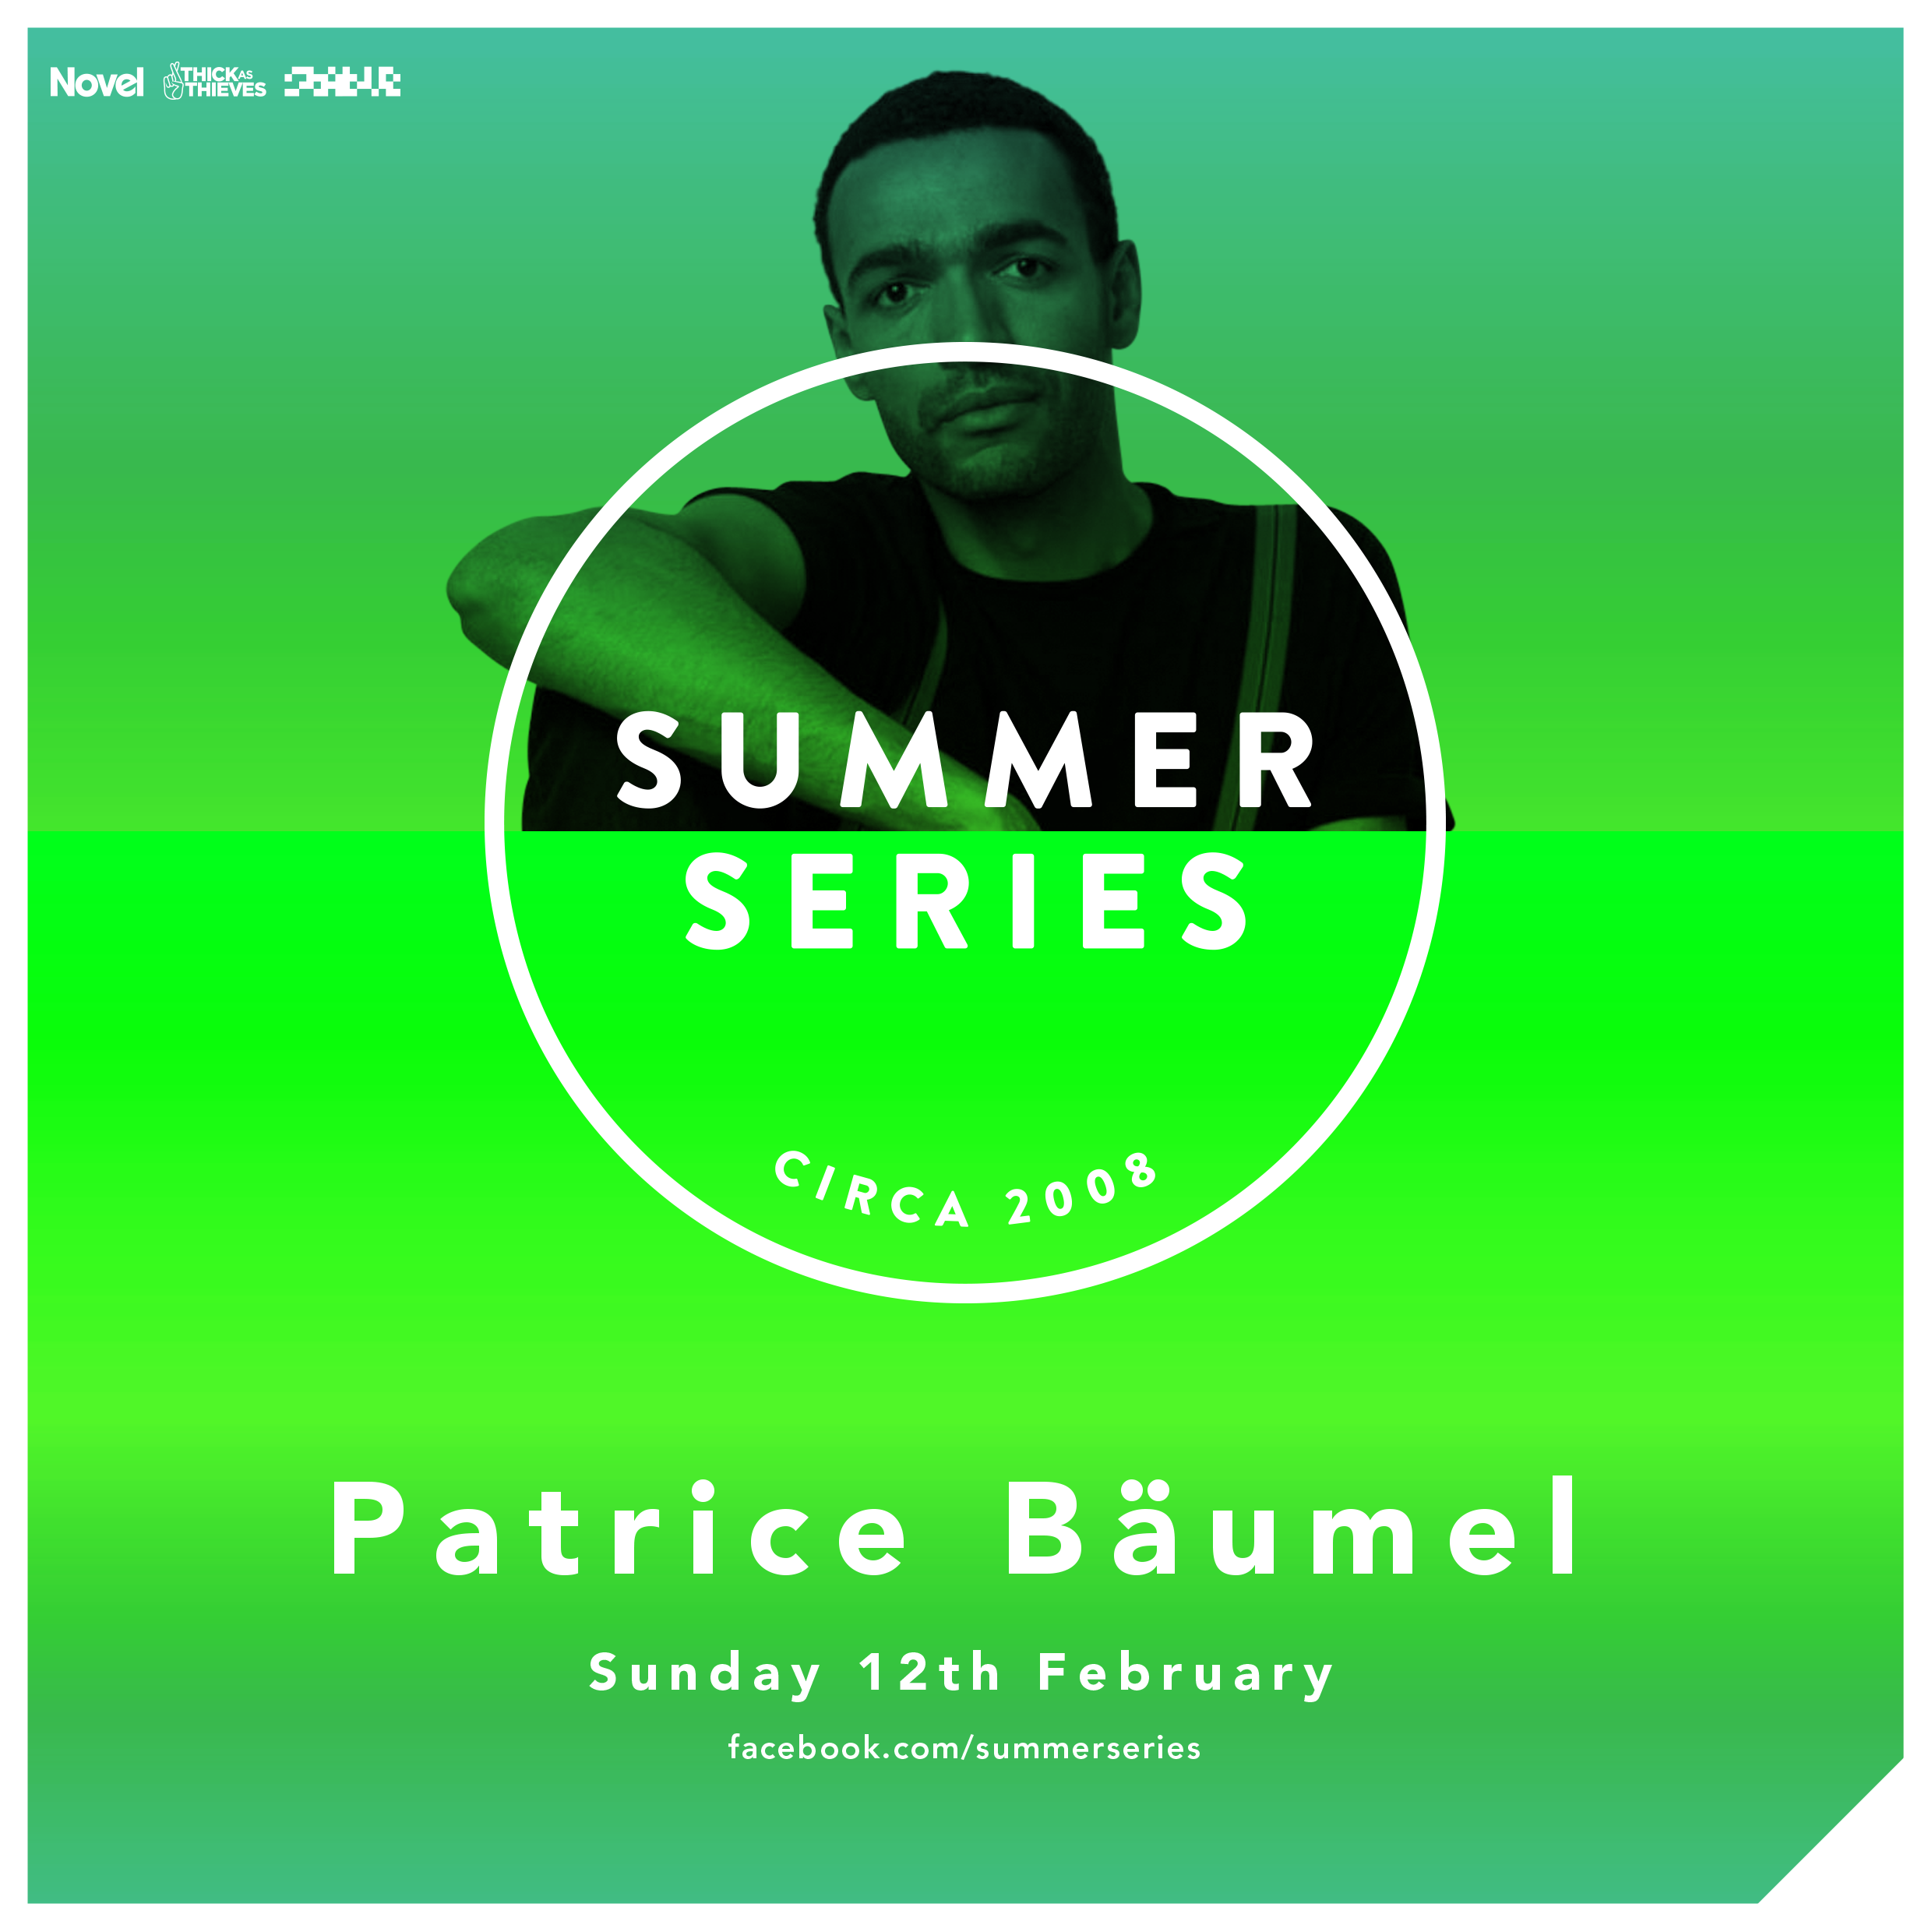  Summer Series with Patrice Baumel